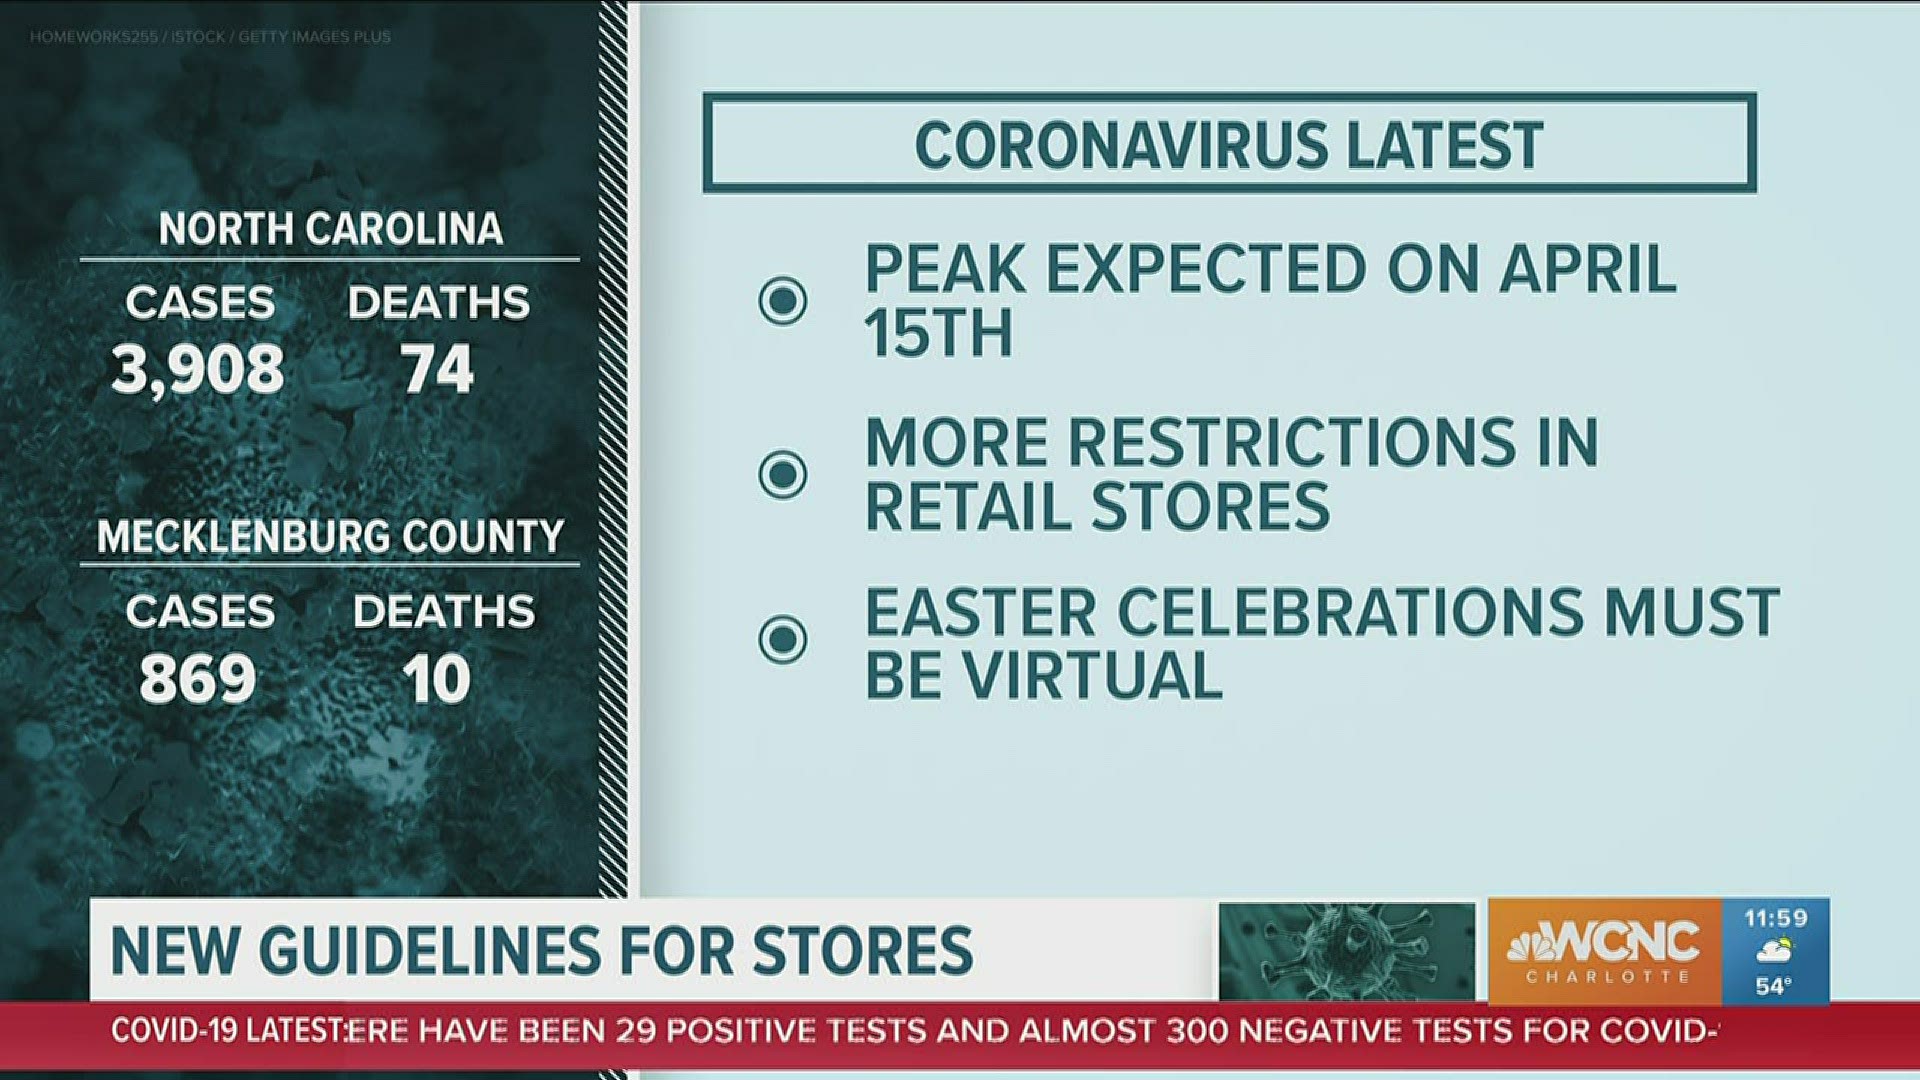 Health officials reported an increase in coronavirus cases in North Carolina Friday, bringing the statewide total to over 3,900.